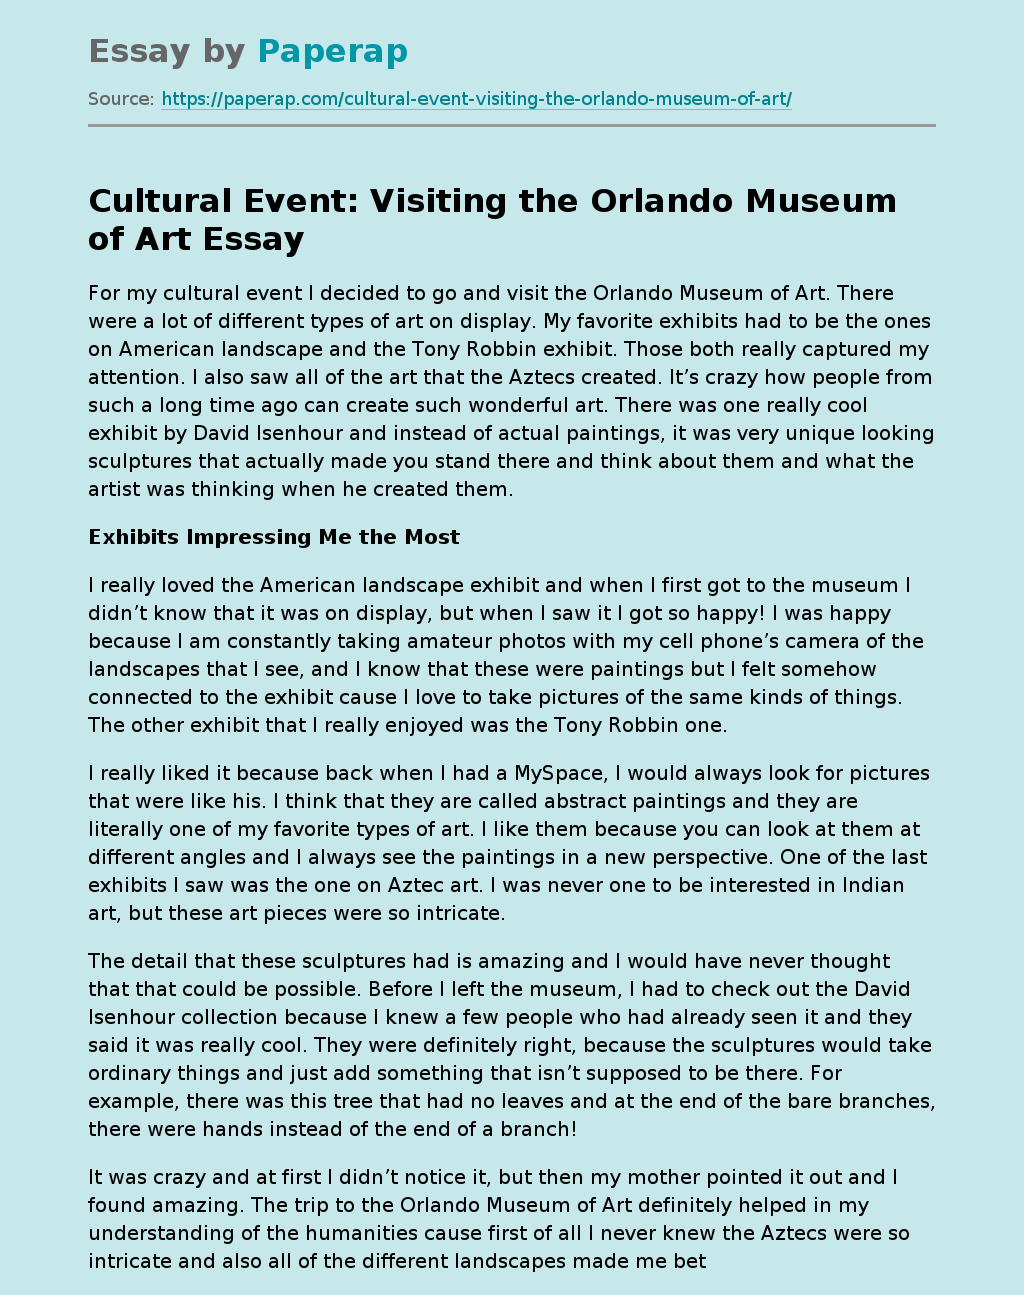 Cultural Event: Visiting the Orlando Museum of Art